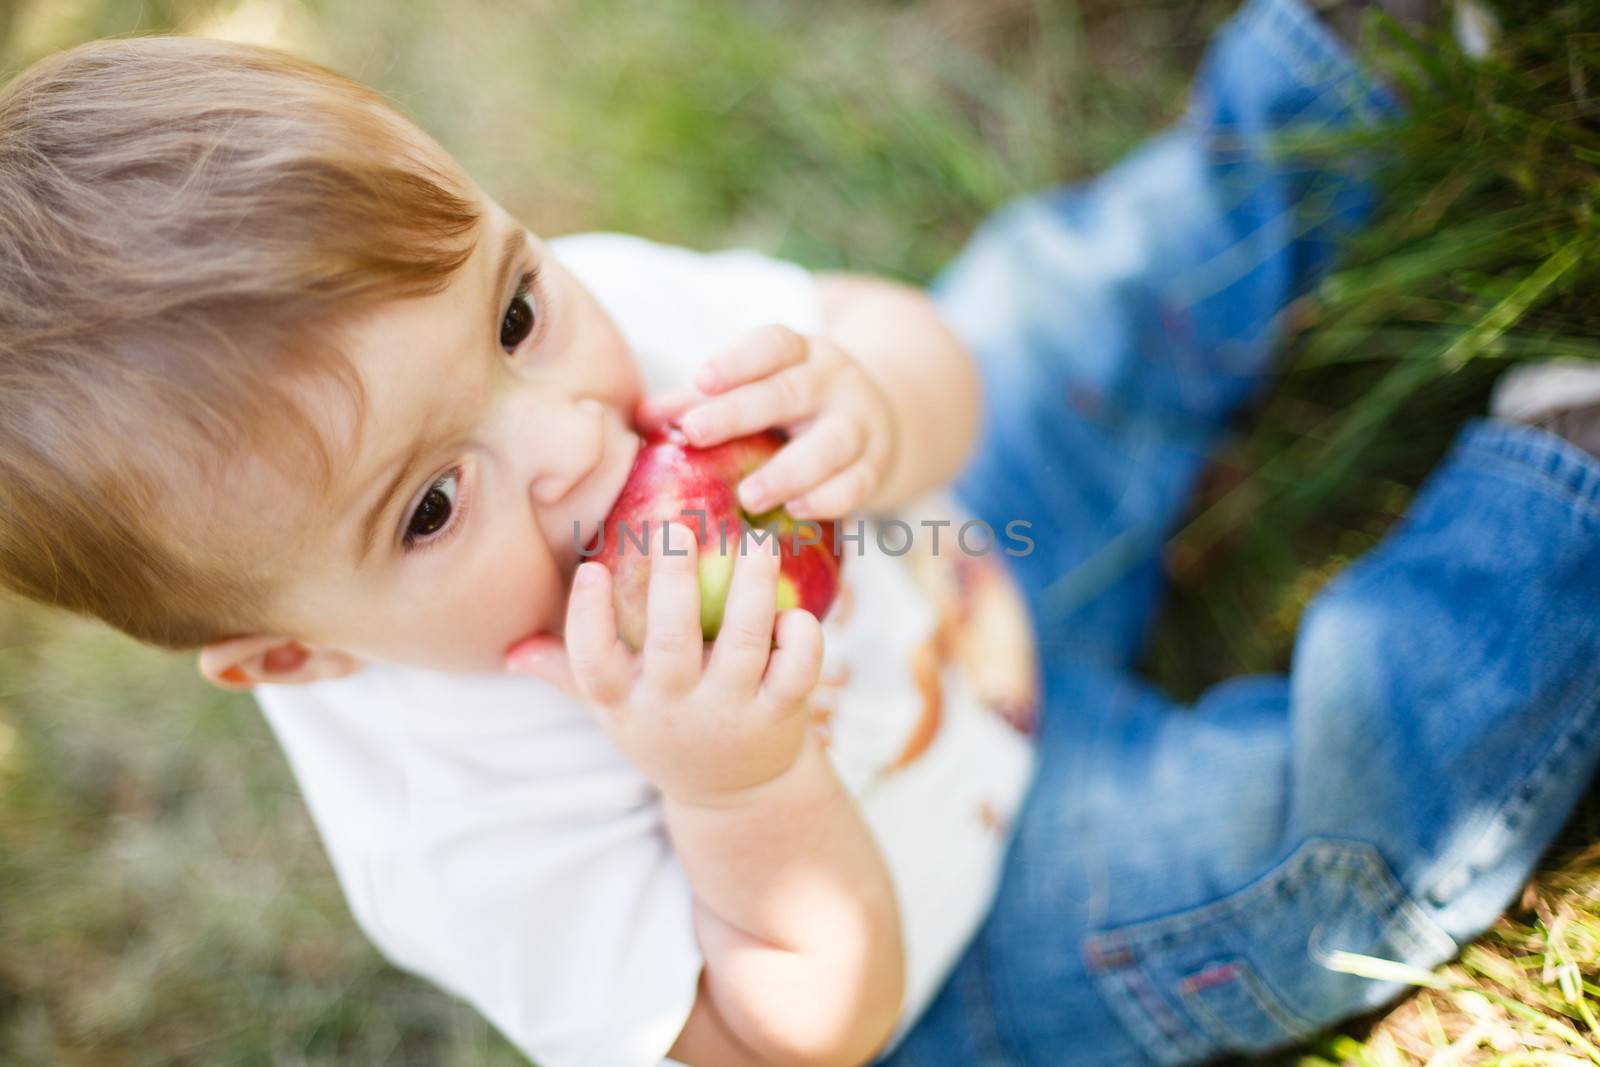 Baby boy eating an apple in an apple orchard